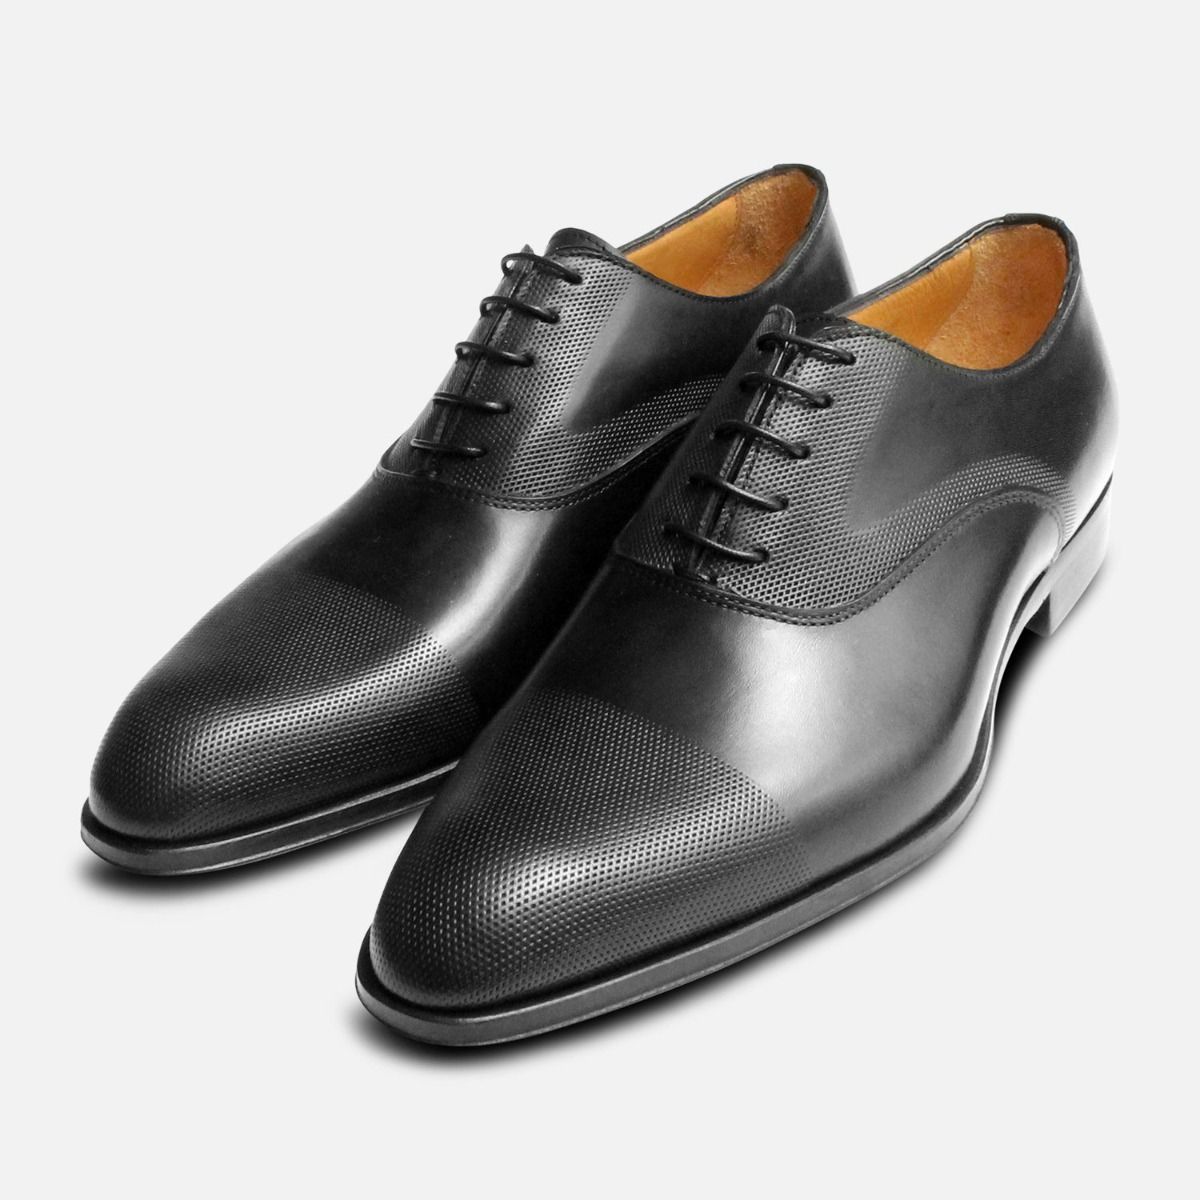 Executive Black Oxford with Punched Cap 